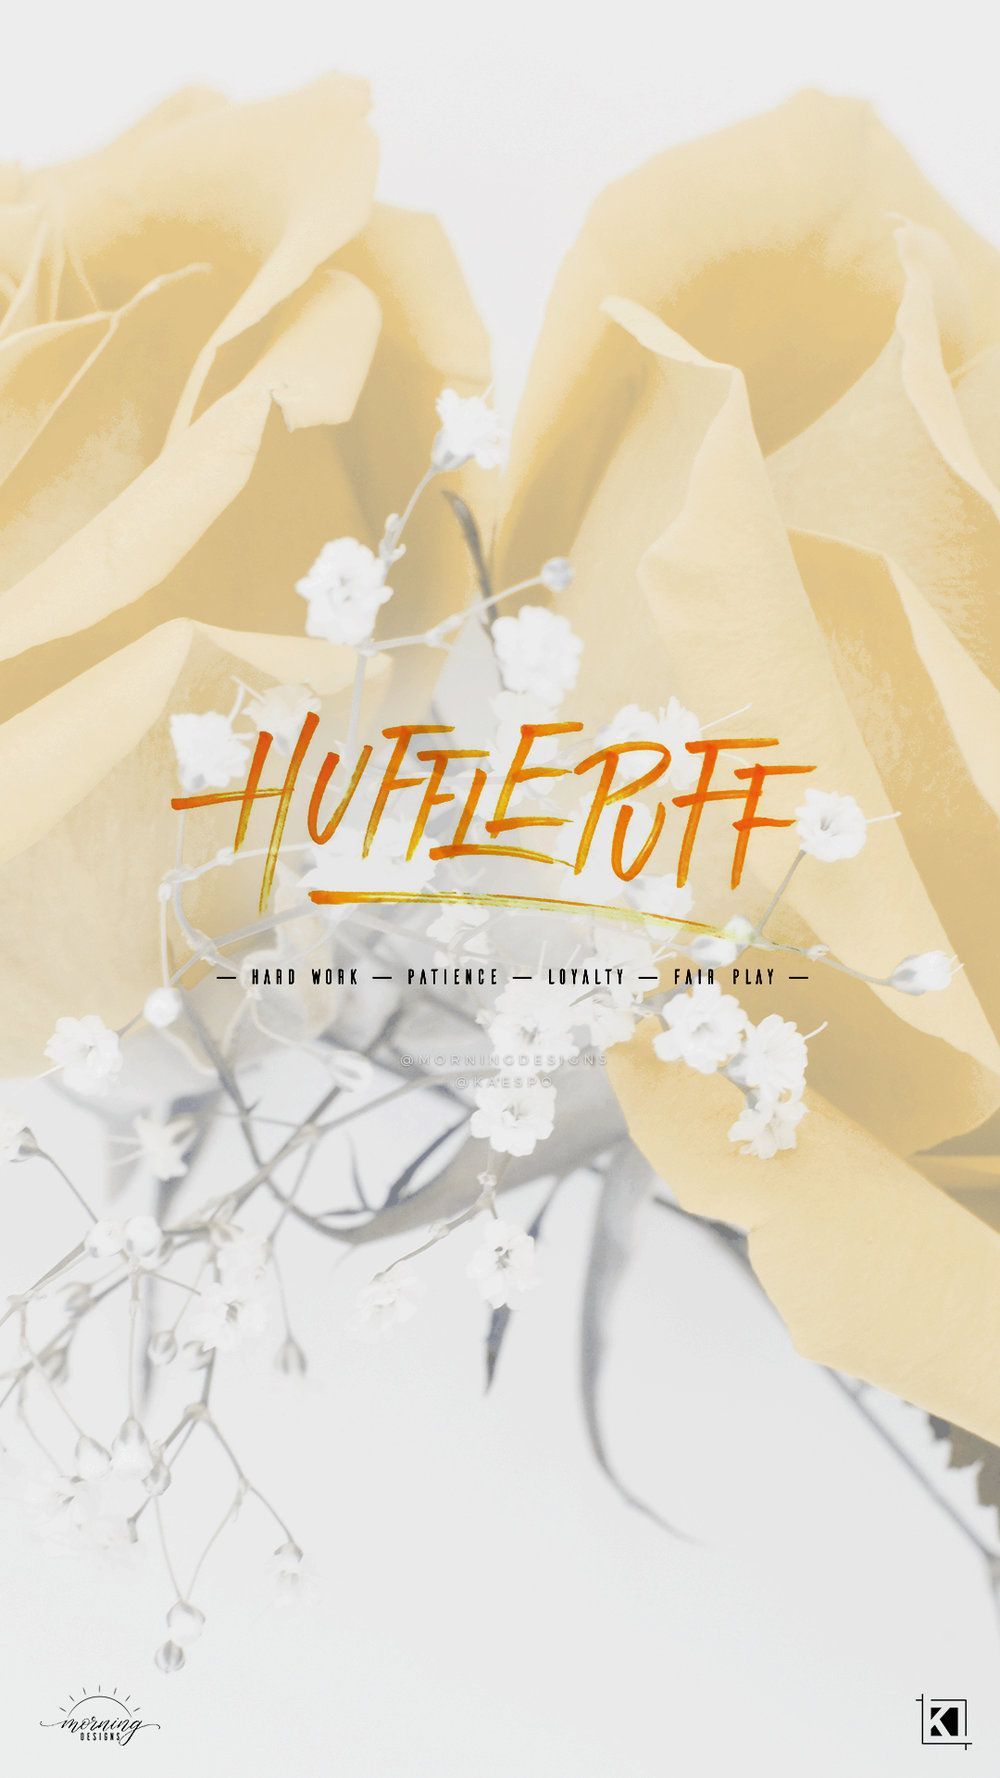 10 Hufflepuff HD Wallpapers and Backgrounds